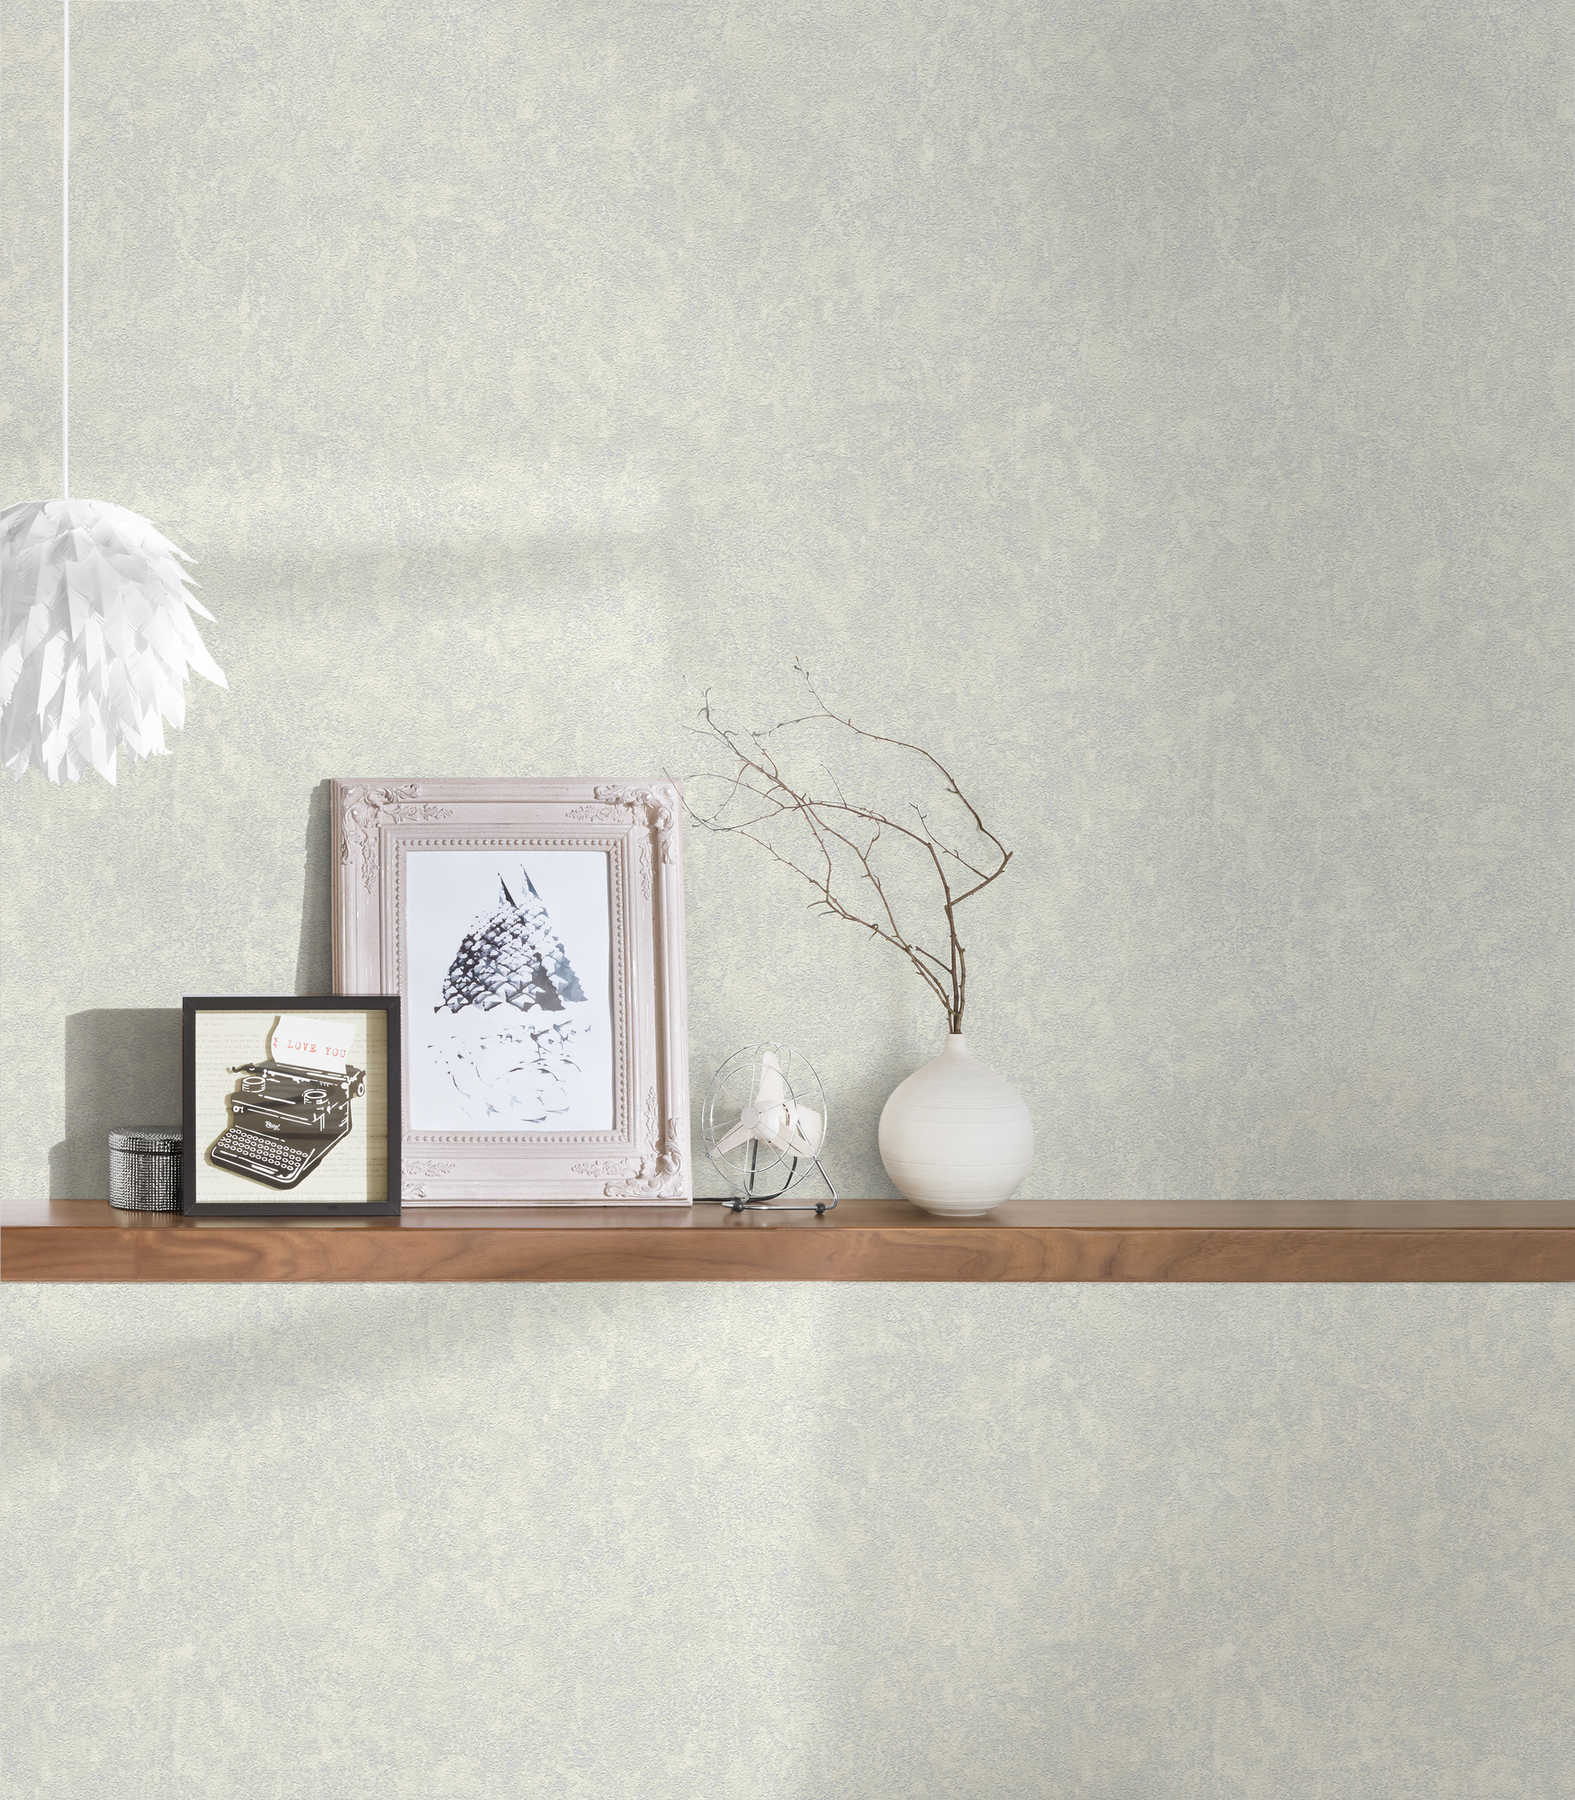             Wallpaper wall plaster look with texture effect & mottled colour - grey
        